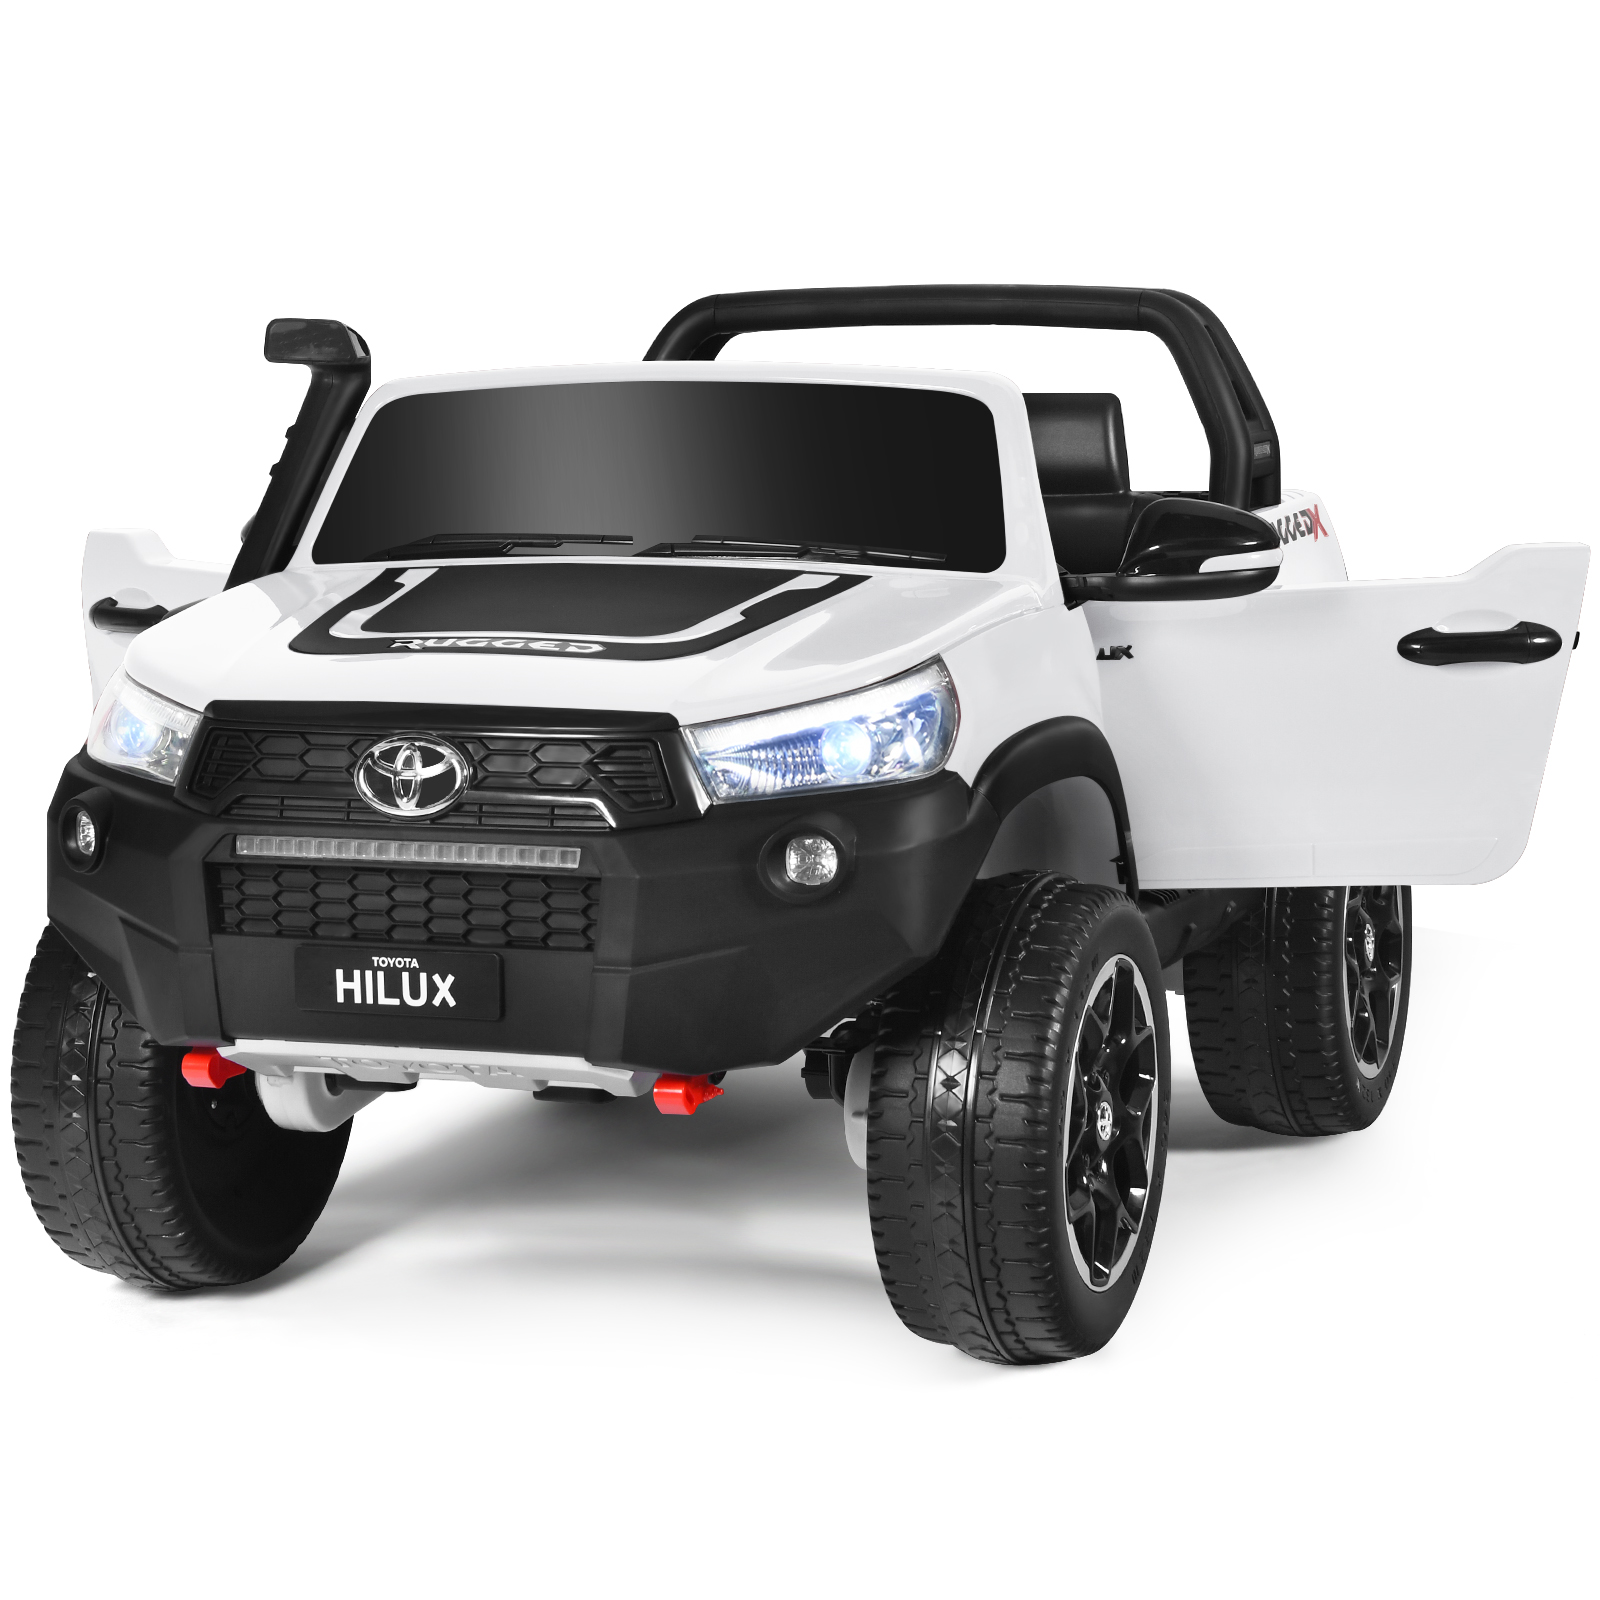 Infans 2*12V Licensed Toyota Hilux Ride On Truck Car 2-Seater 4WD Remote Control White - image 1 of 7